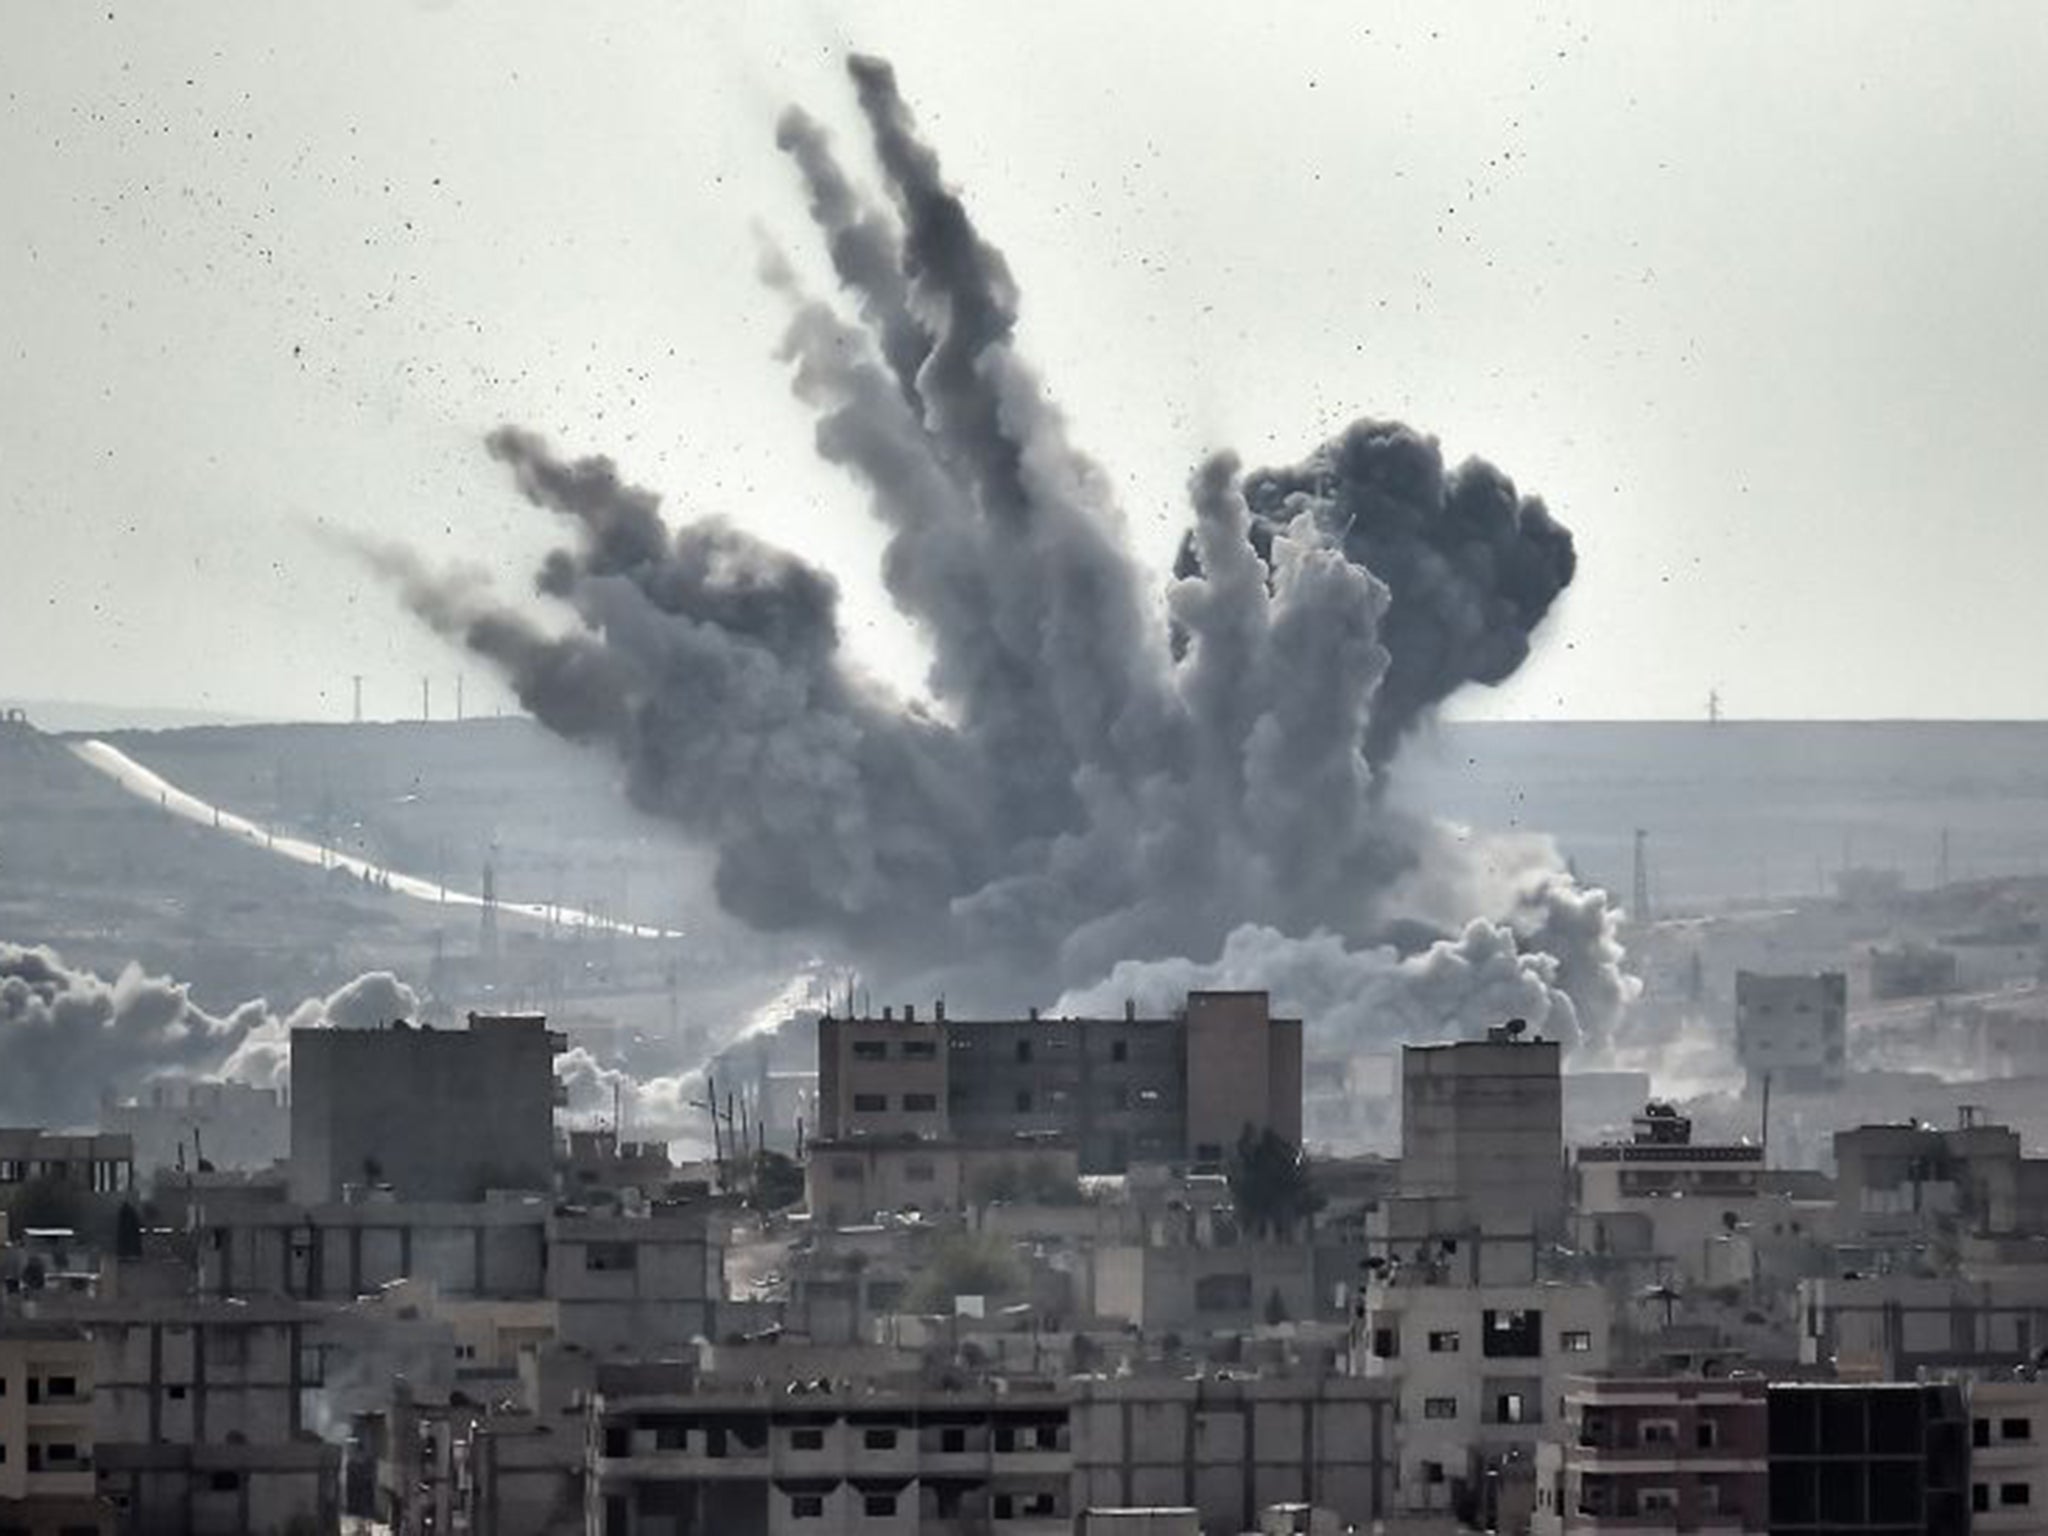 A shell explodes in Kobani, just one of the fronts where IS fighters are engaged (AFP/Getty)